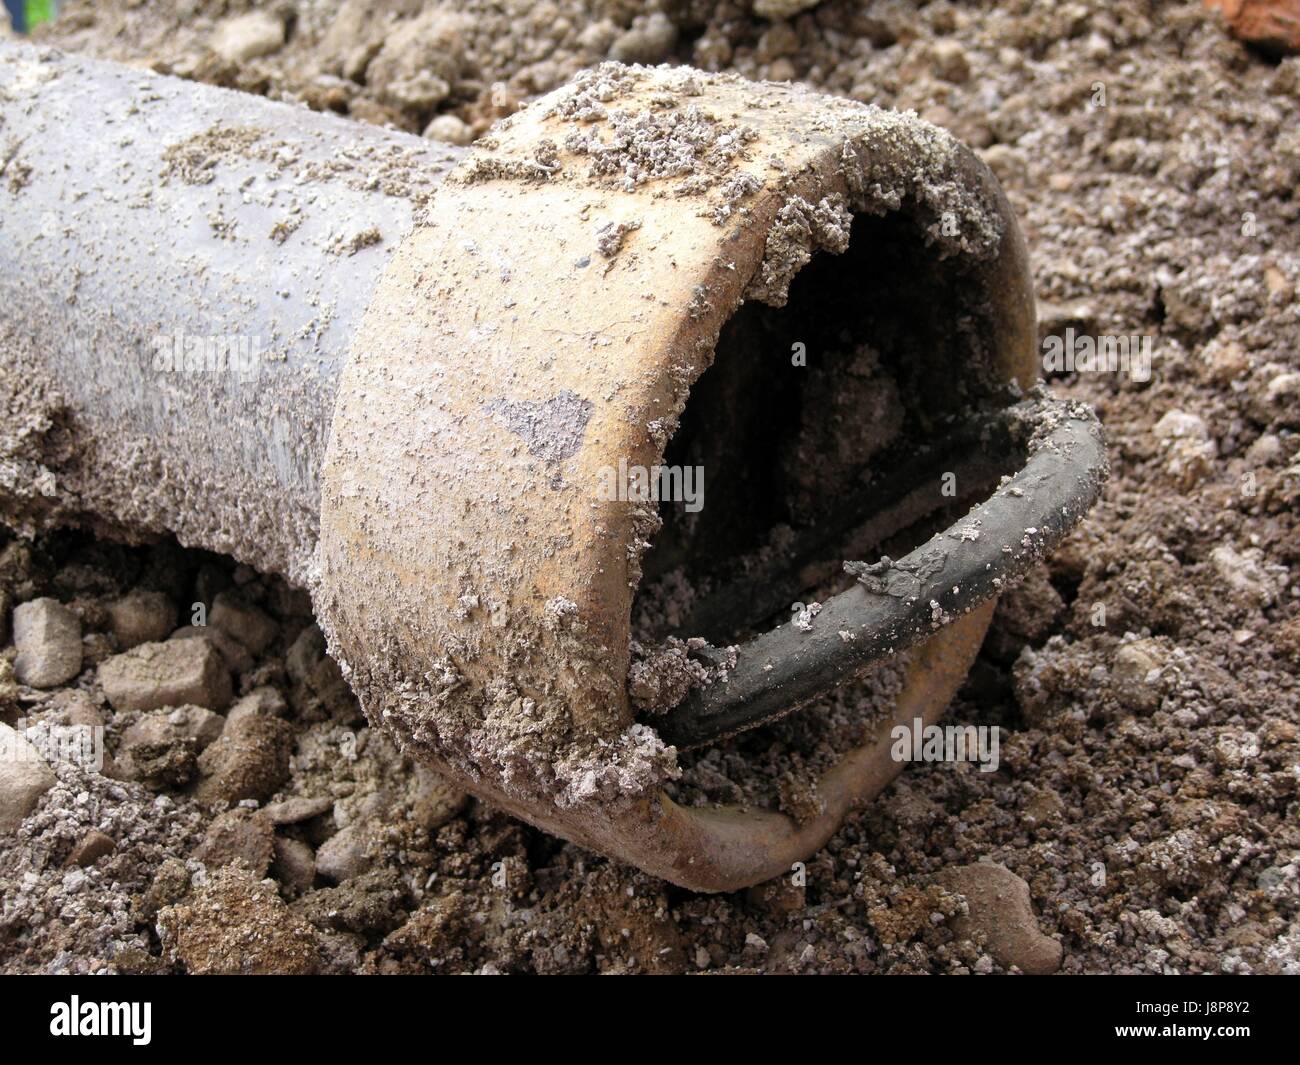 channel, sewerage, civil engineering, tube, pipe, channel, concrete, disposal, Stock Photo